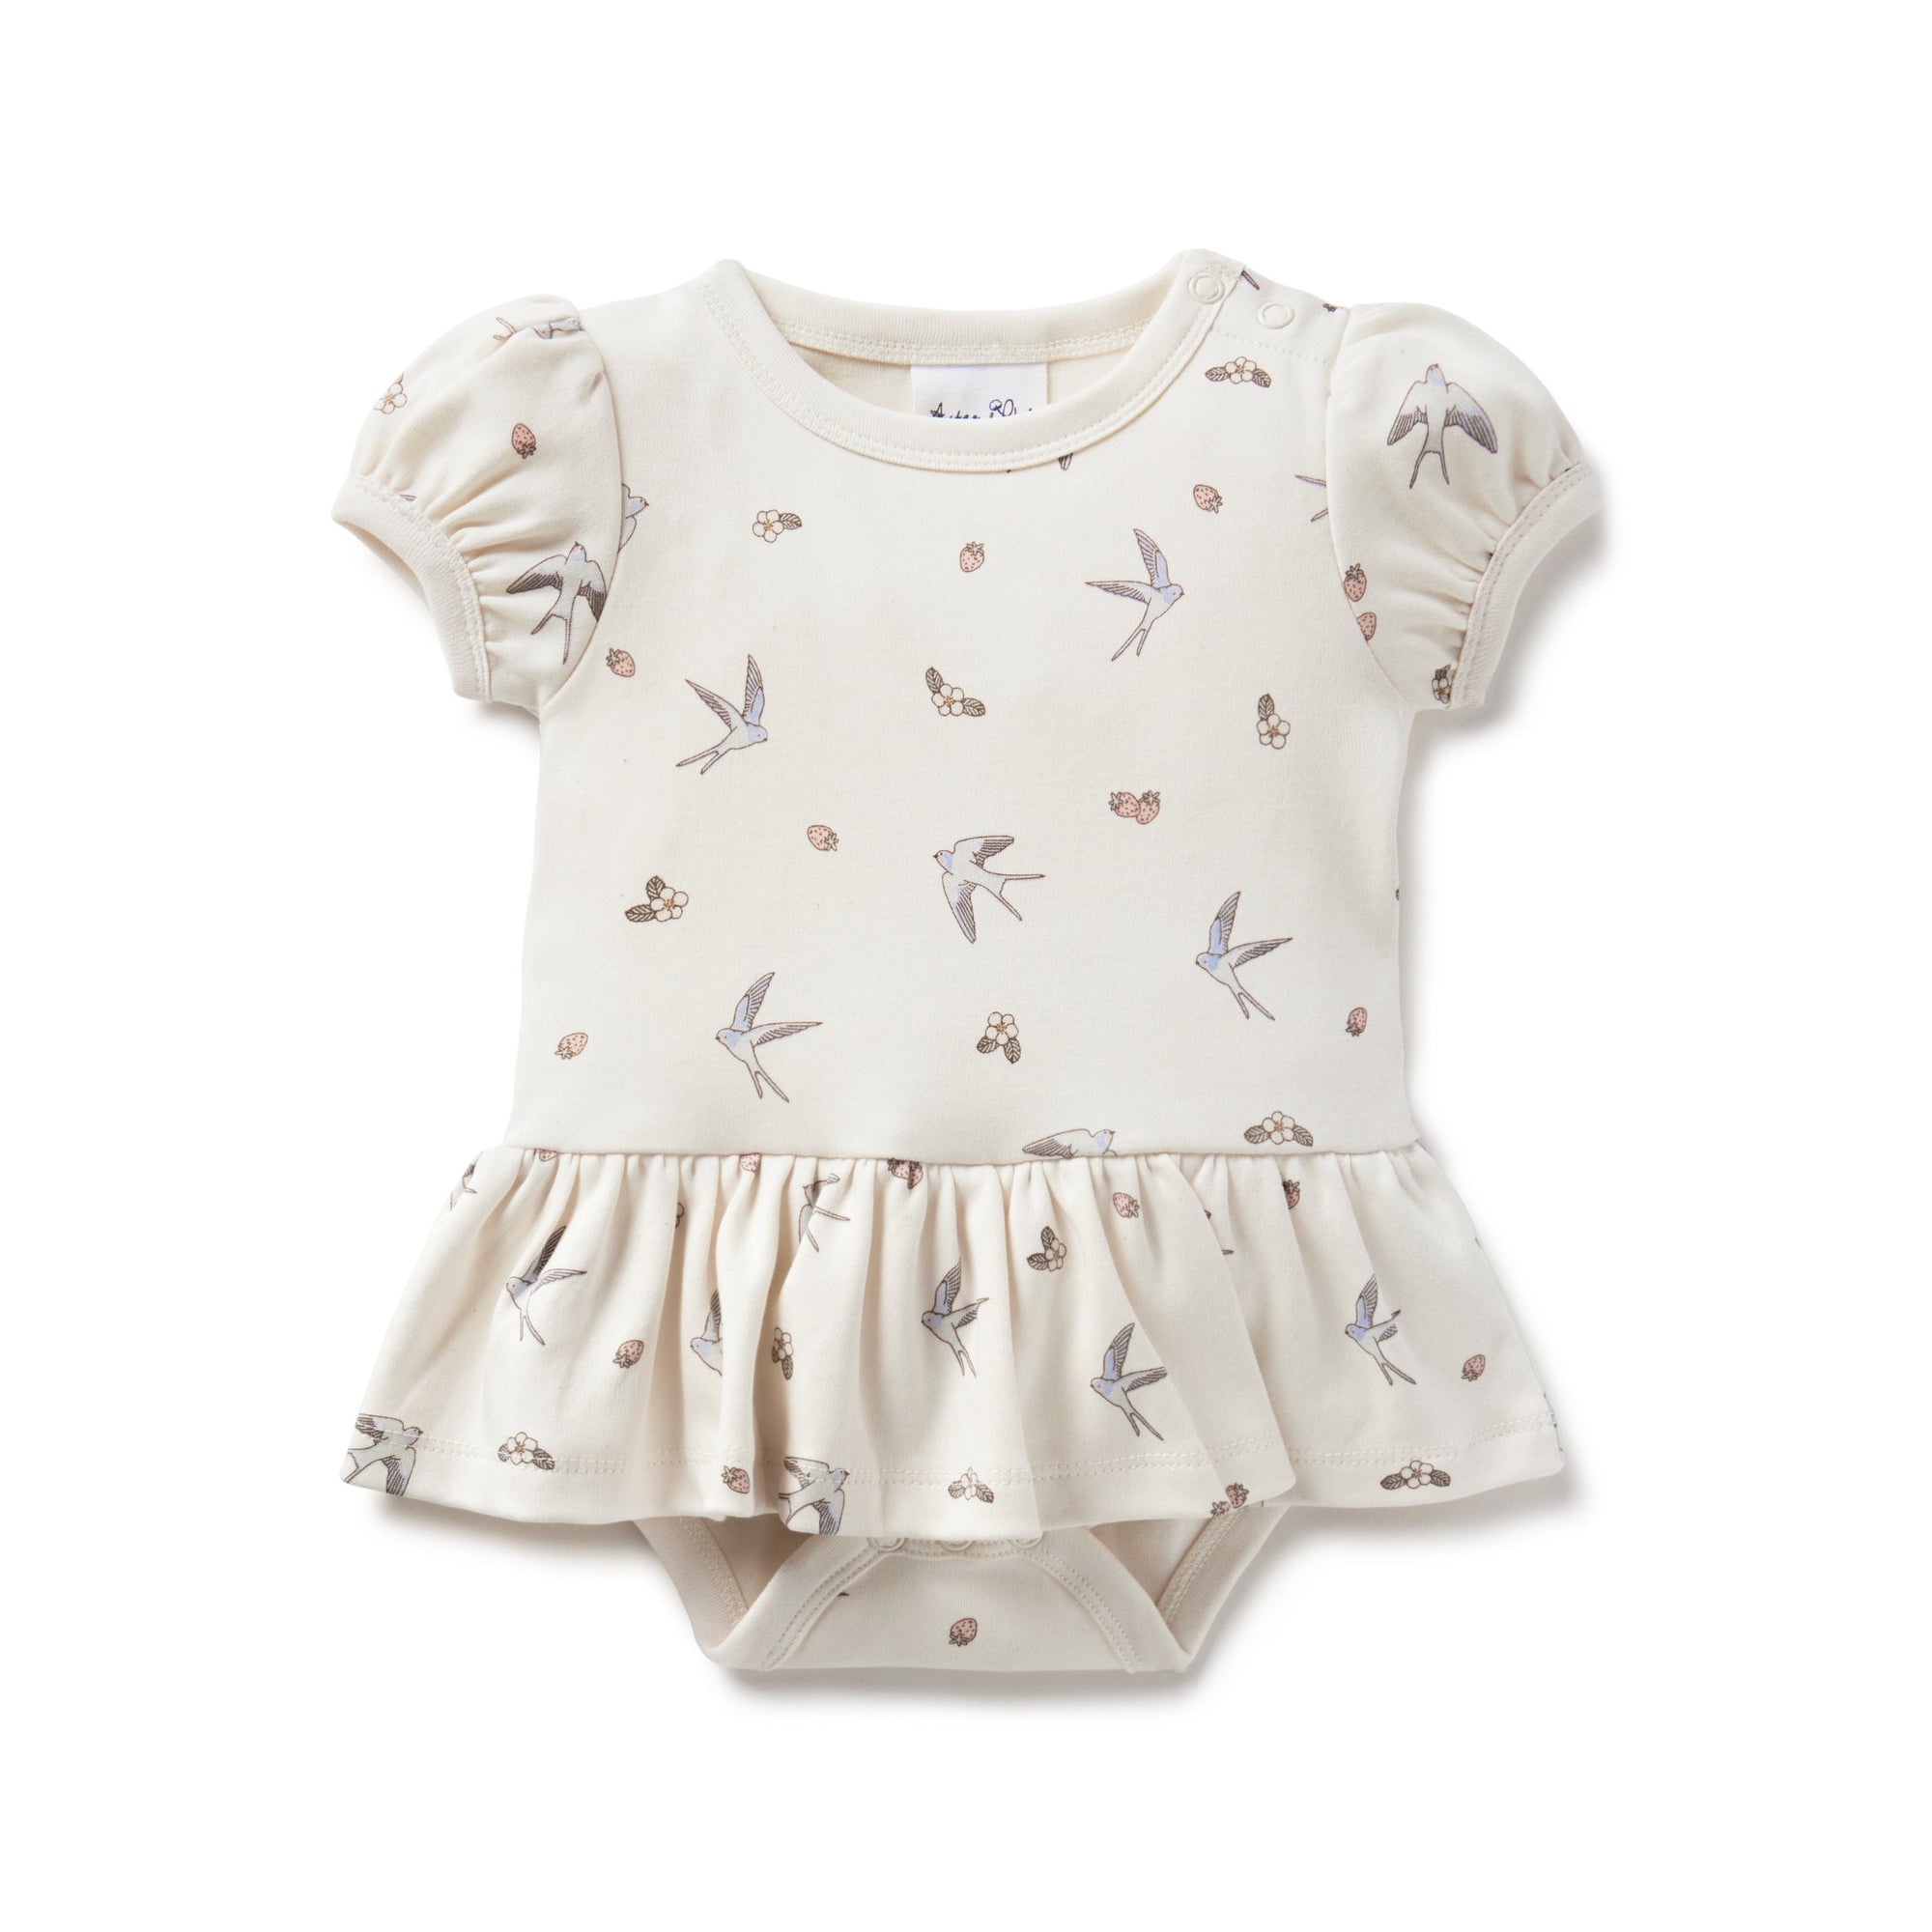 Aster and oak frill bodysuit - angus and dudley